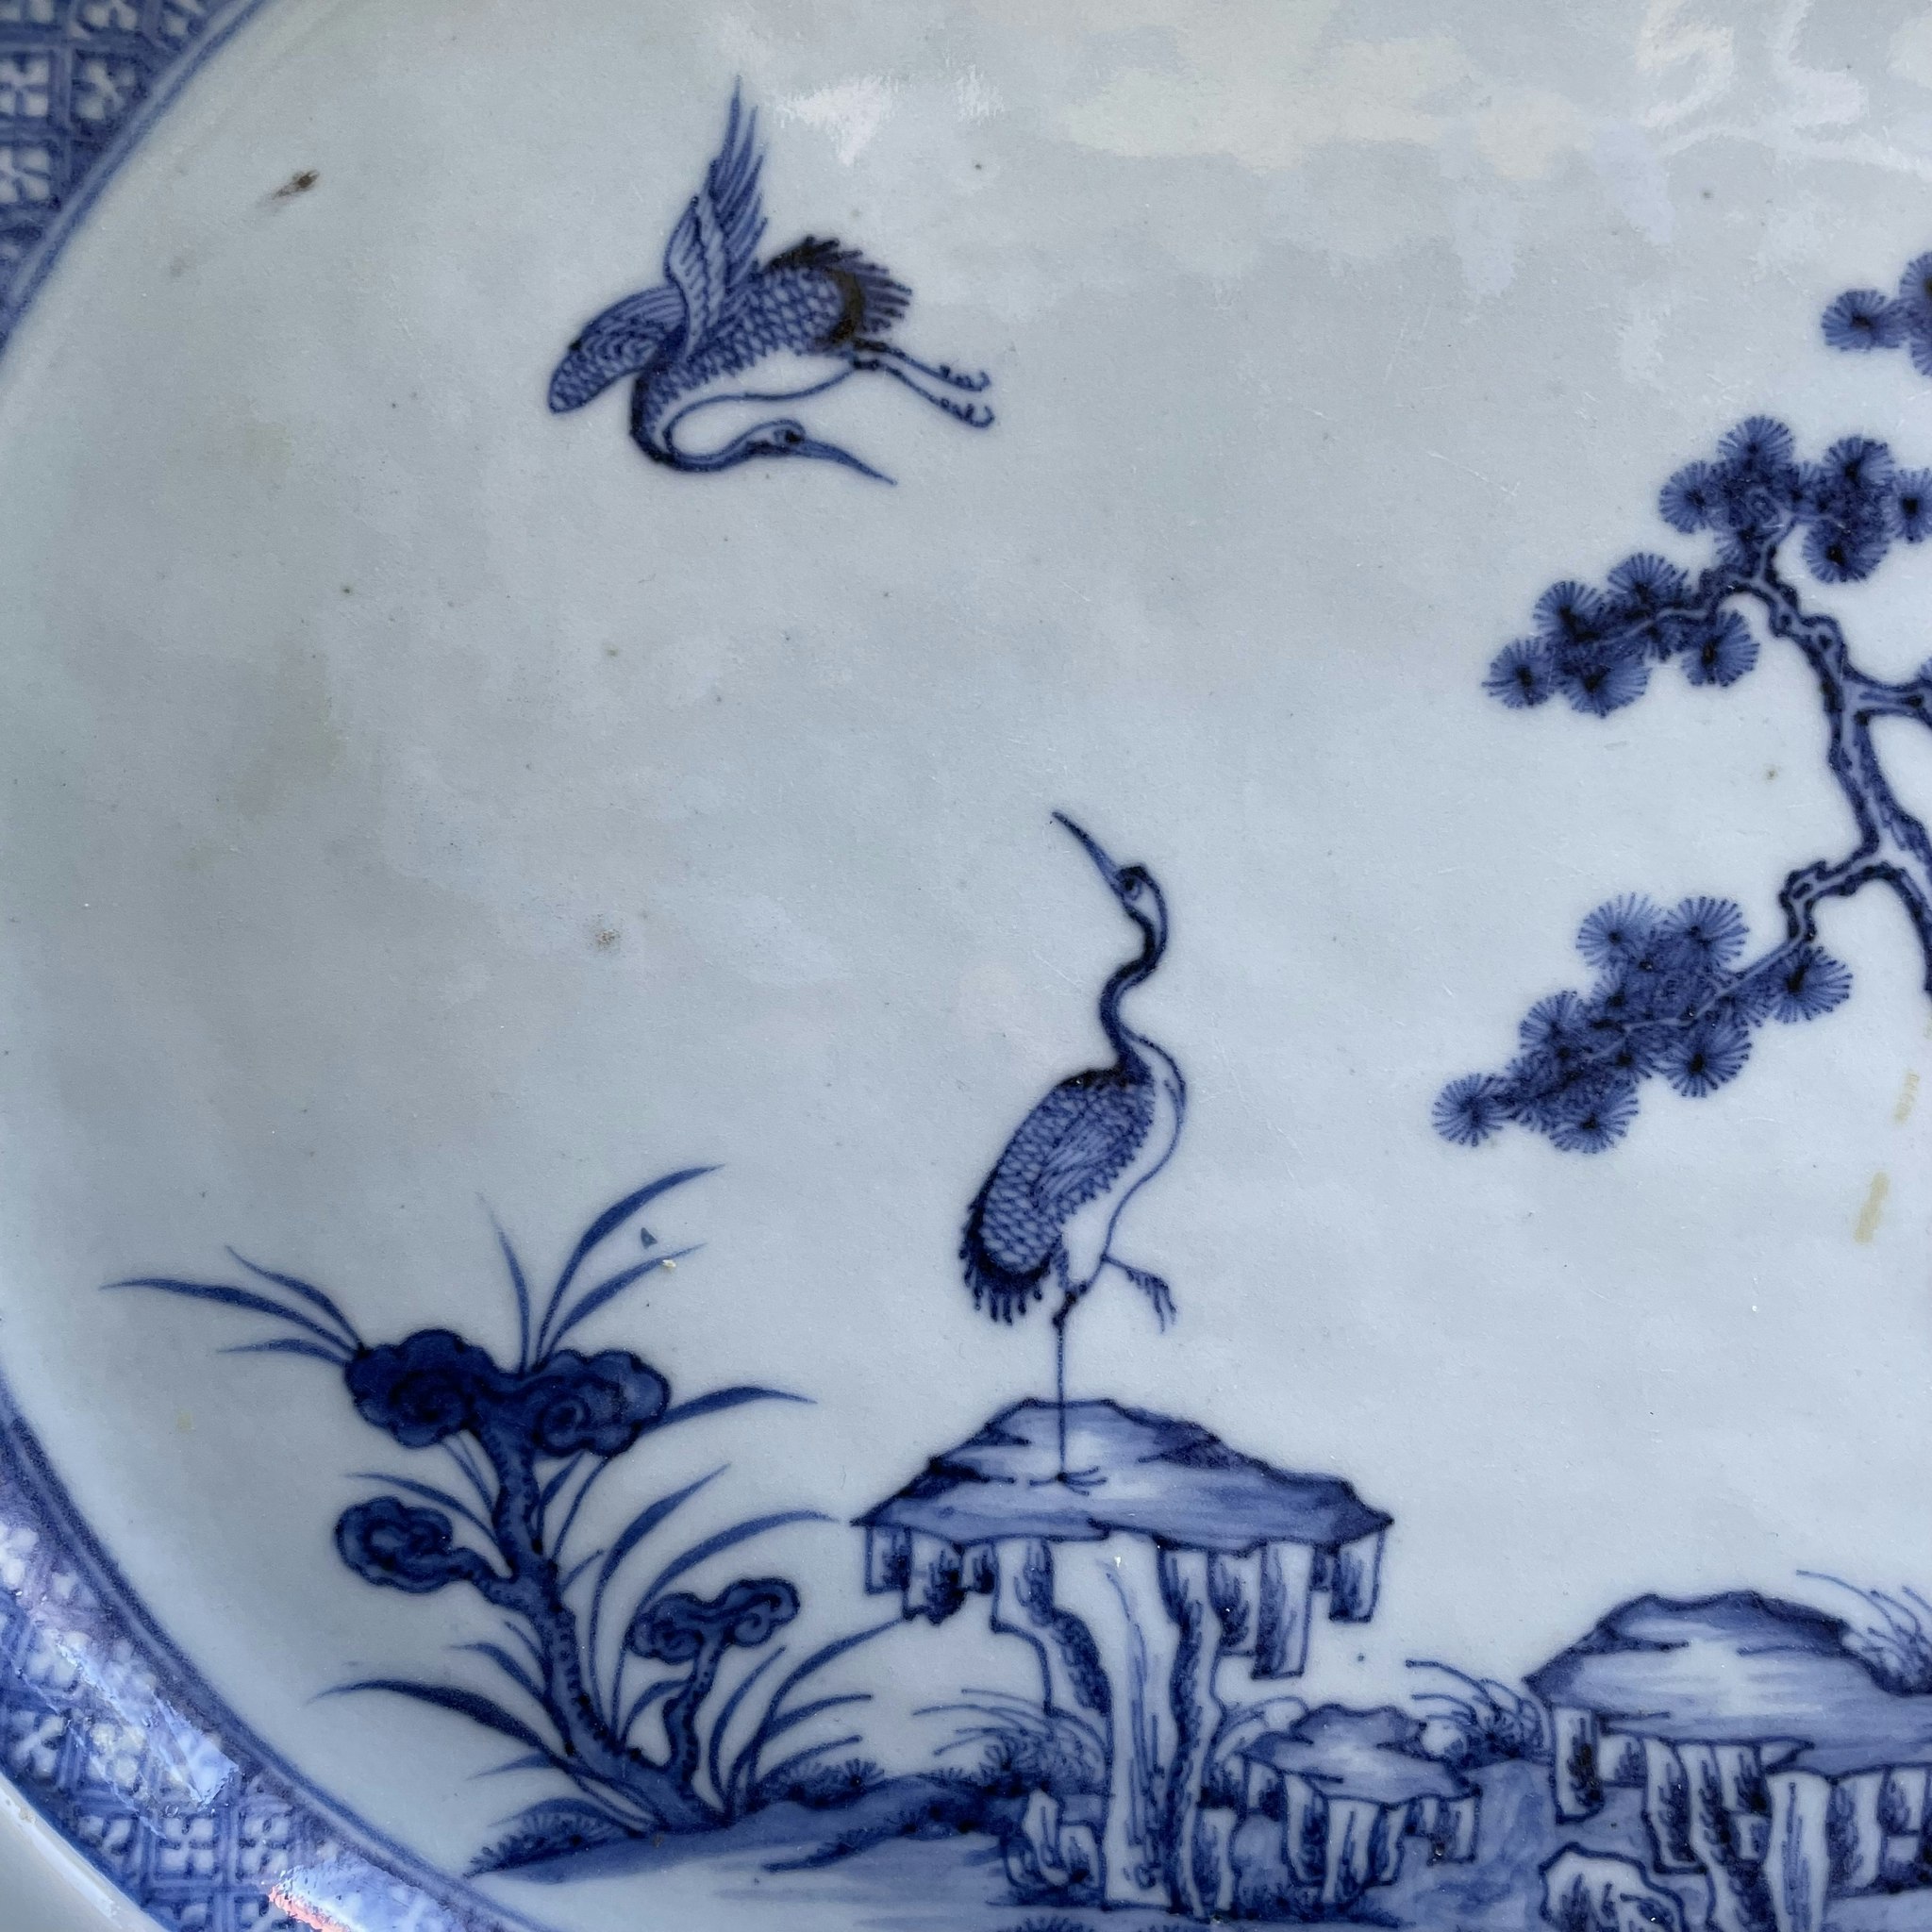 Antique Chinese Export Blue and White Porcelain platter, Qianlong period #1131